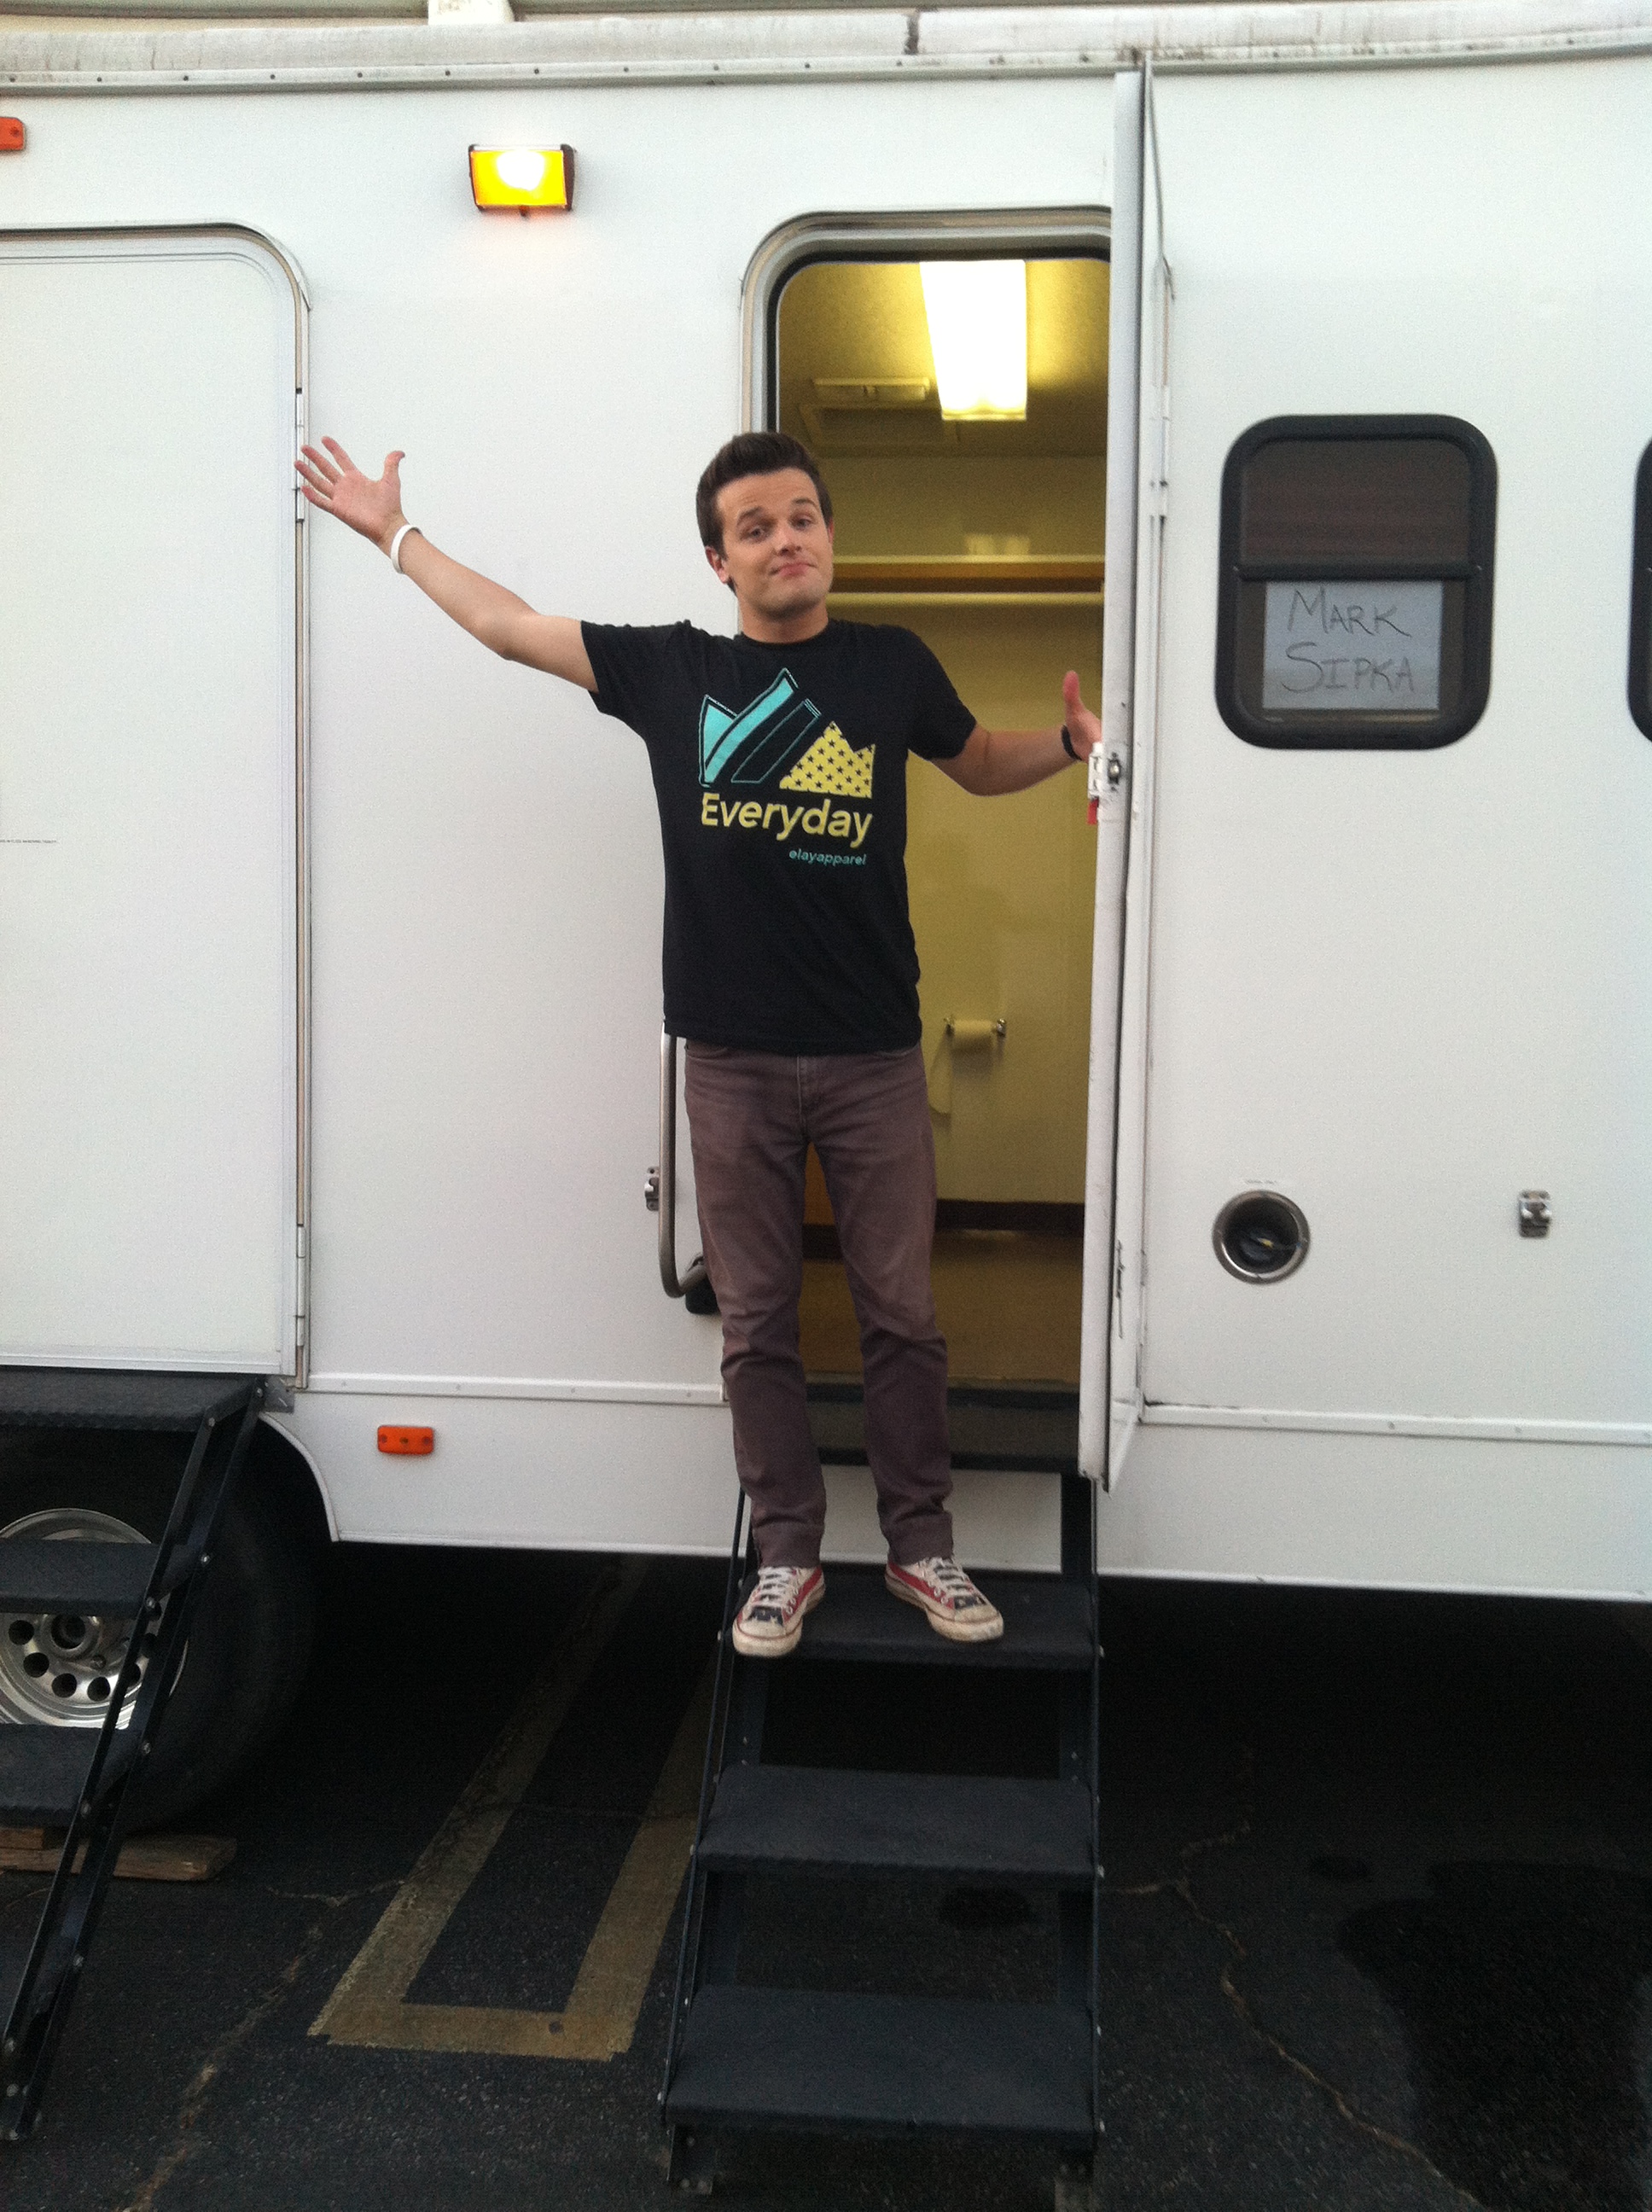 Mark Sipka outside of trailer for Spark It Up Live event.